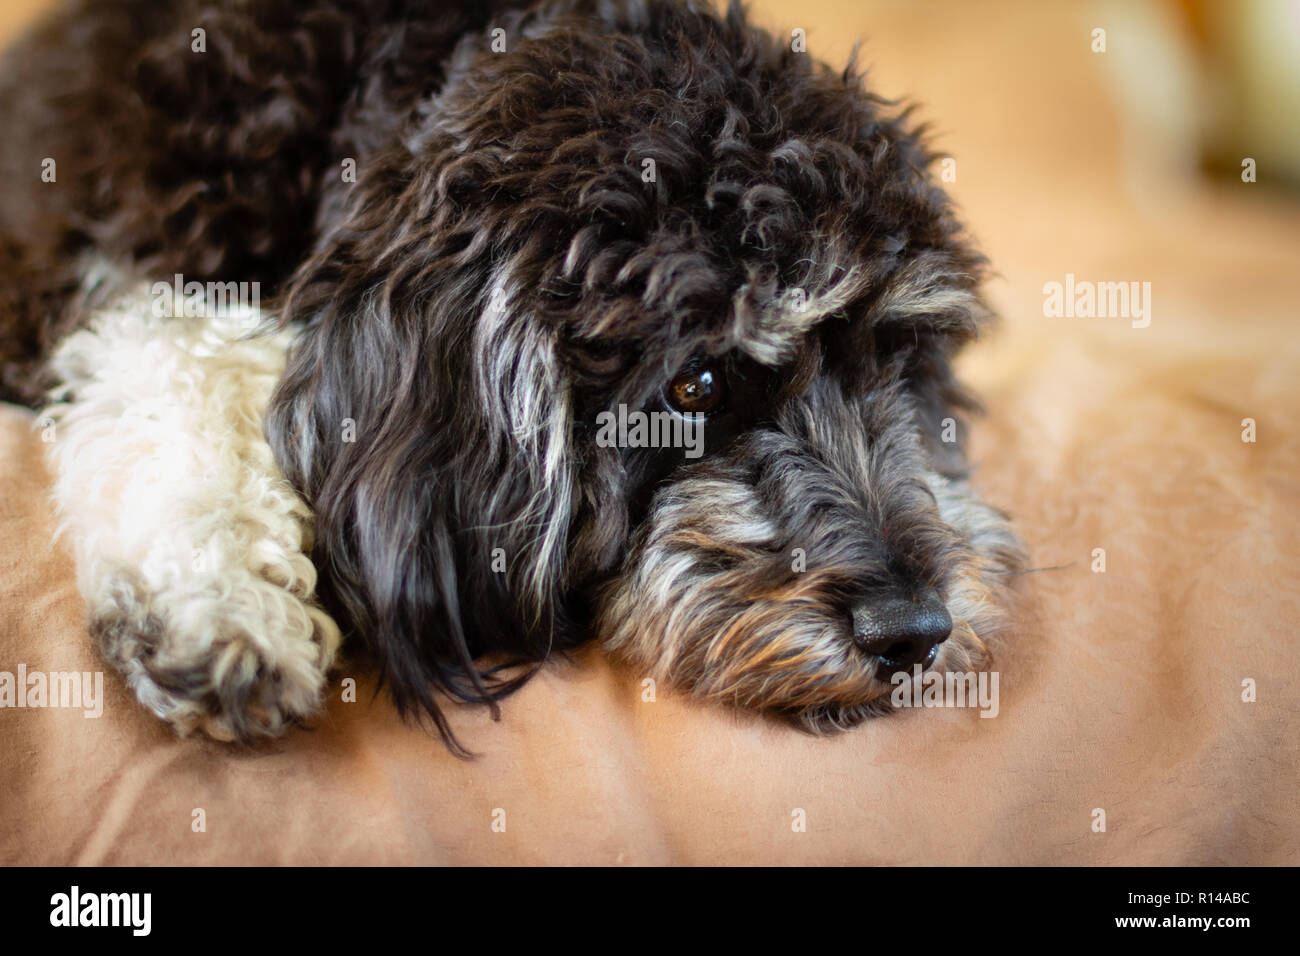 A black and white dog cockapoo (cavoodle) a poodle cross dog which do not shed hair they have a sweet nature and are ideal companions Stock Photo